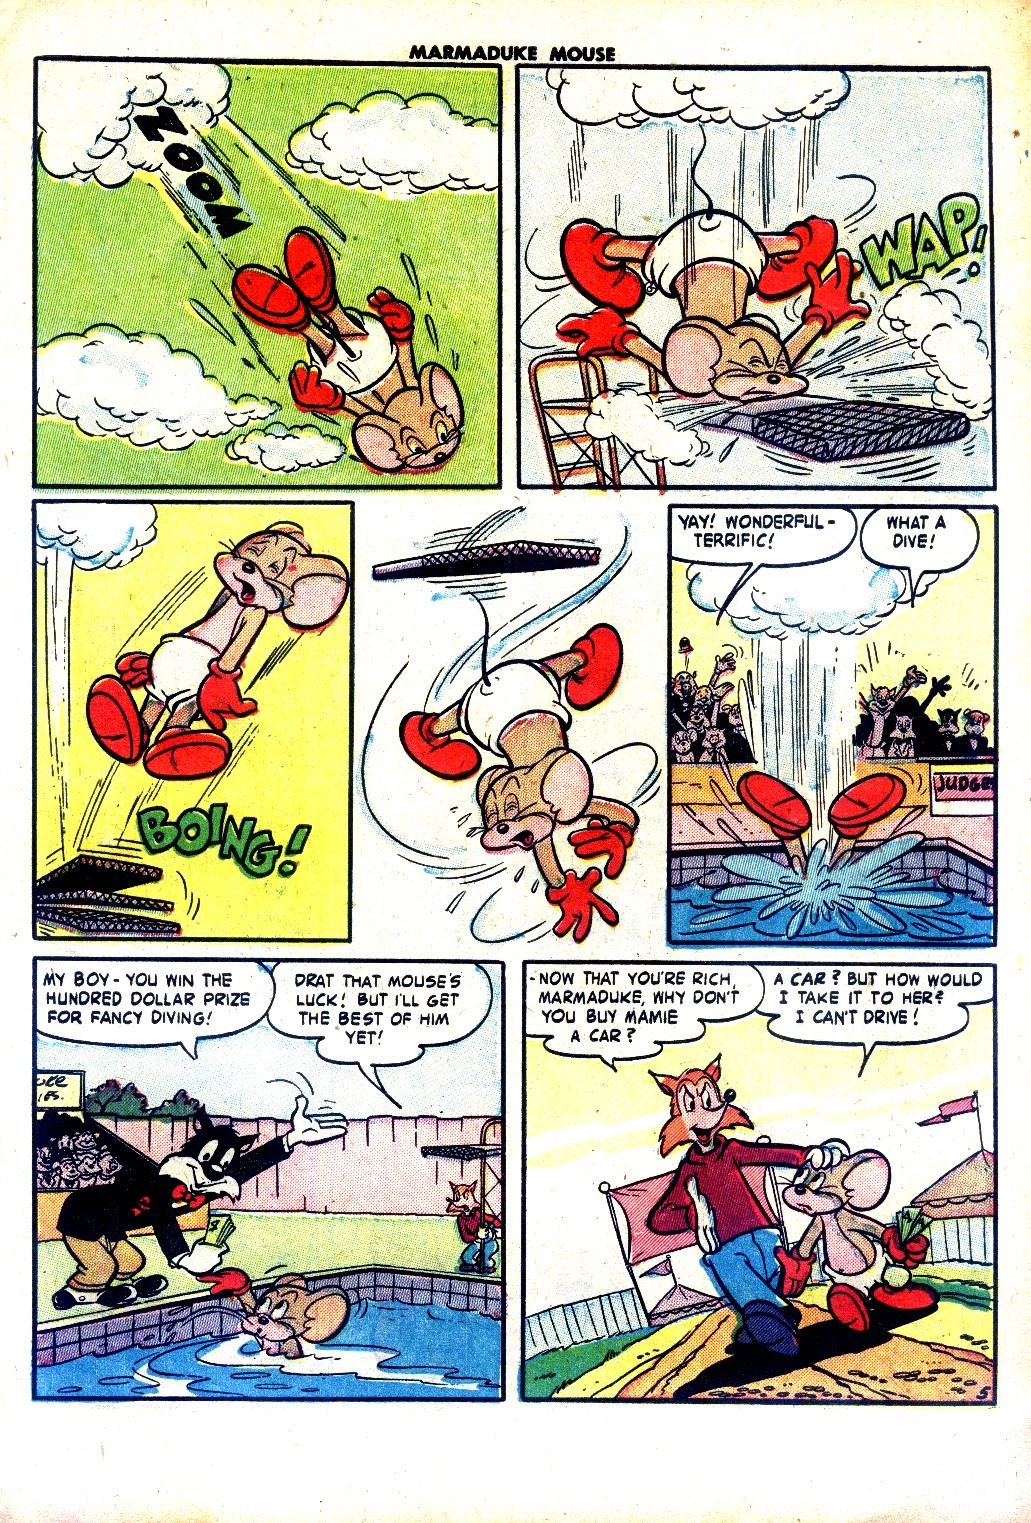 Read online Marmaduke Mouse comic -  Issue #40 - 7